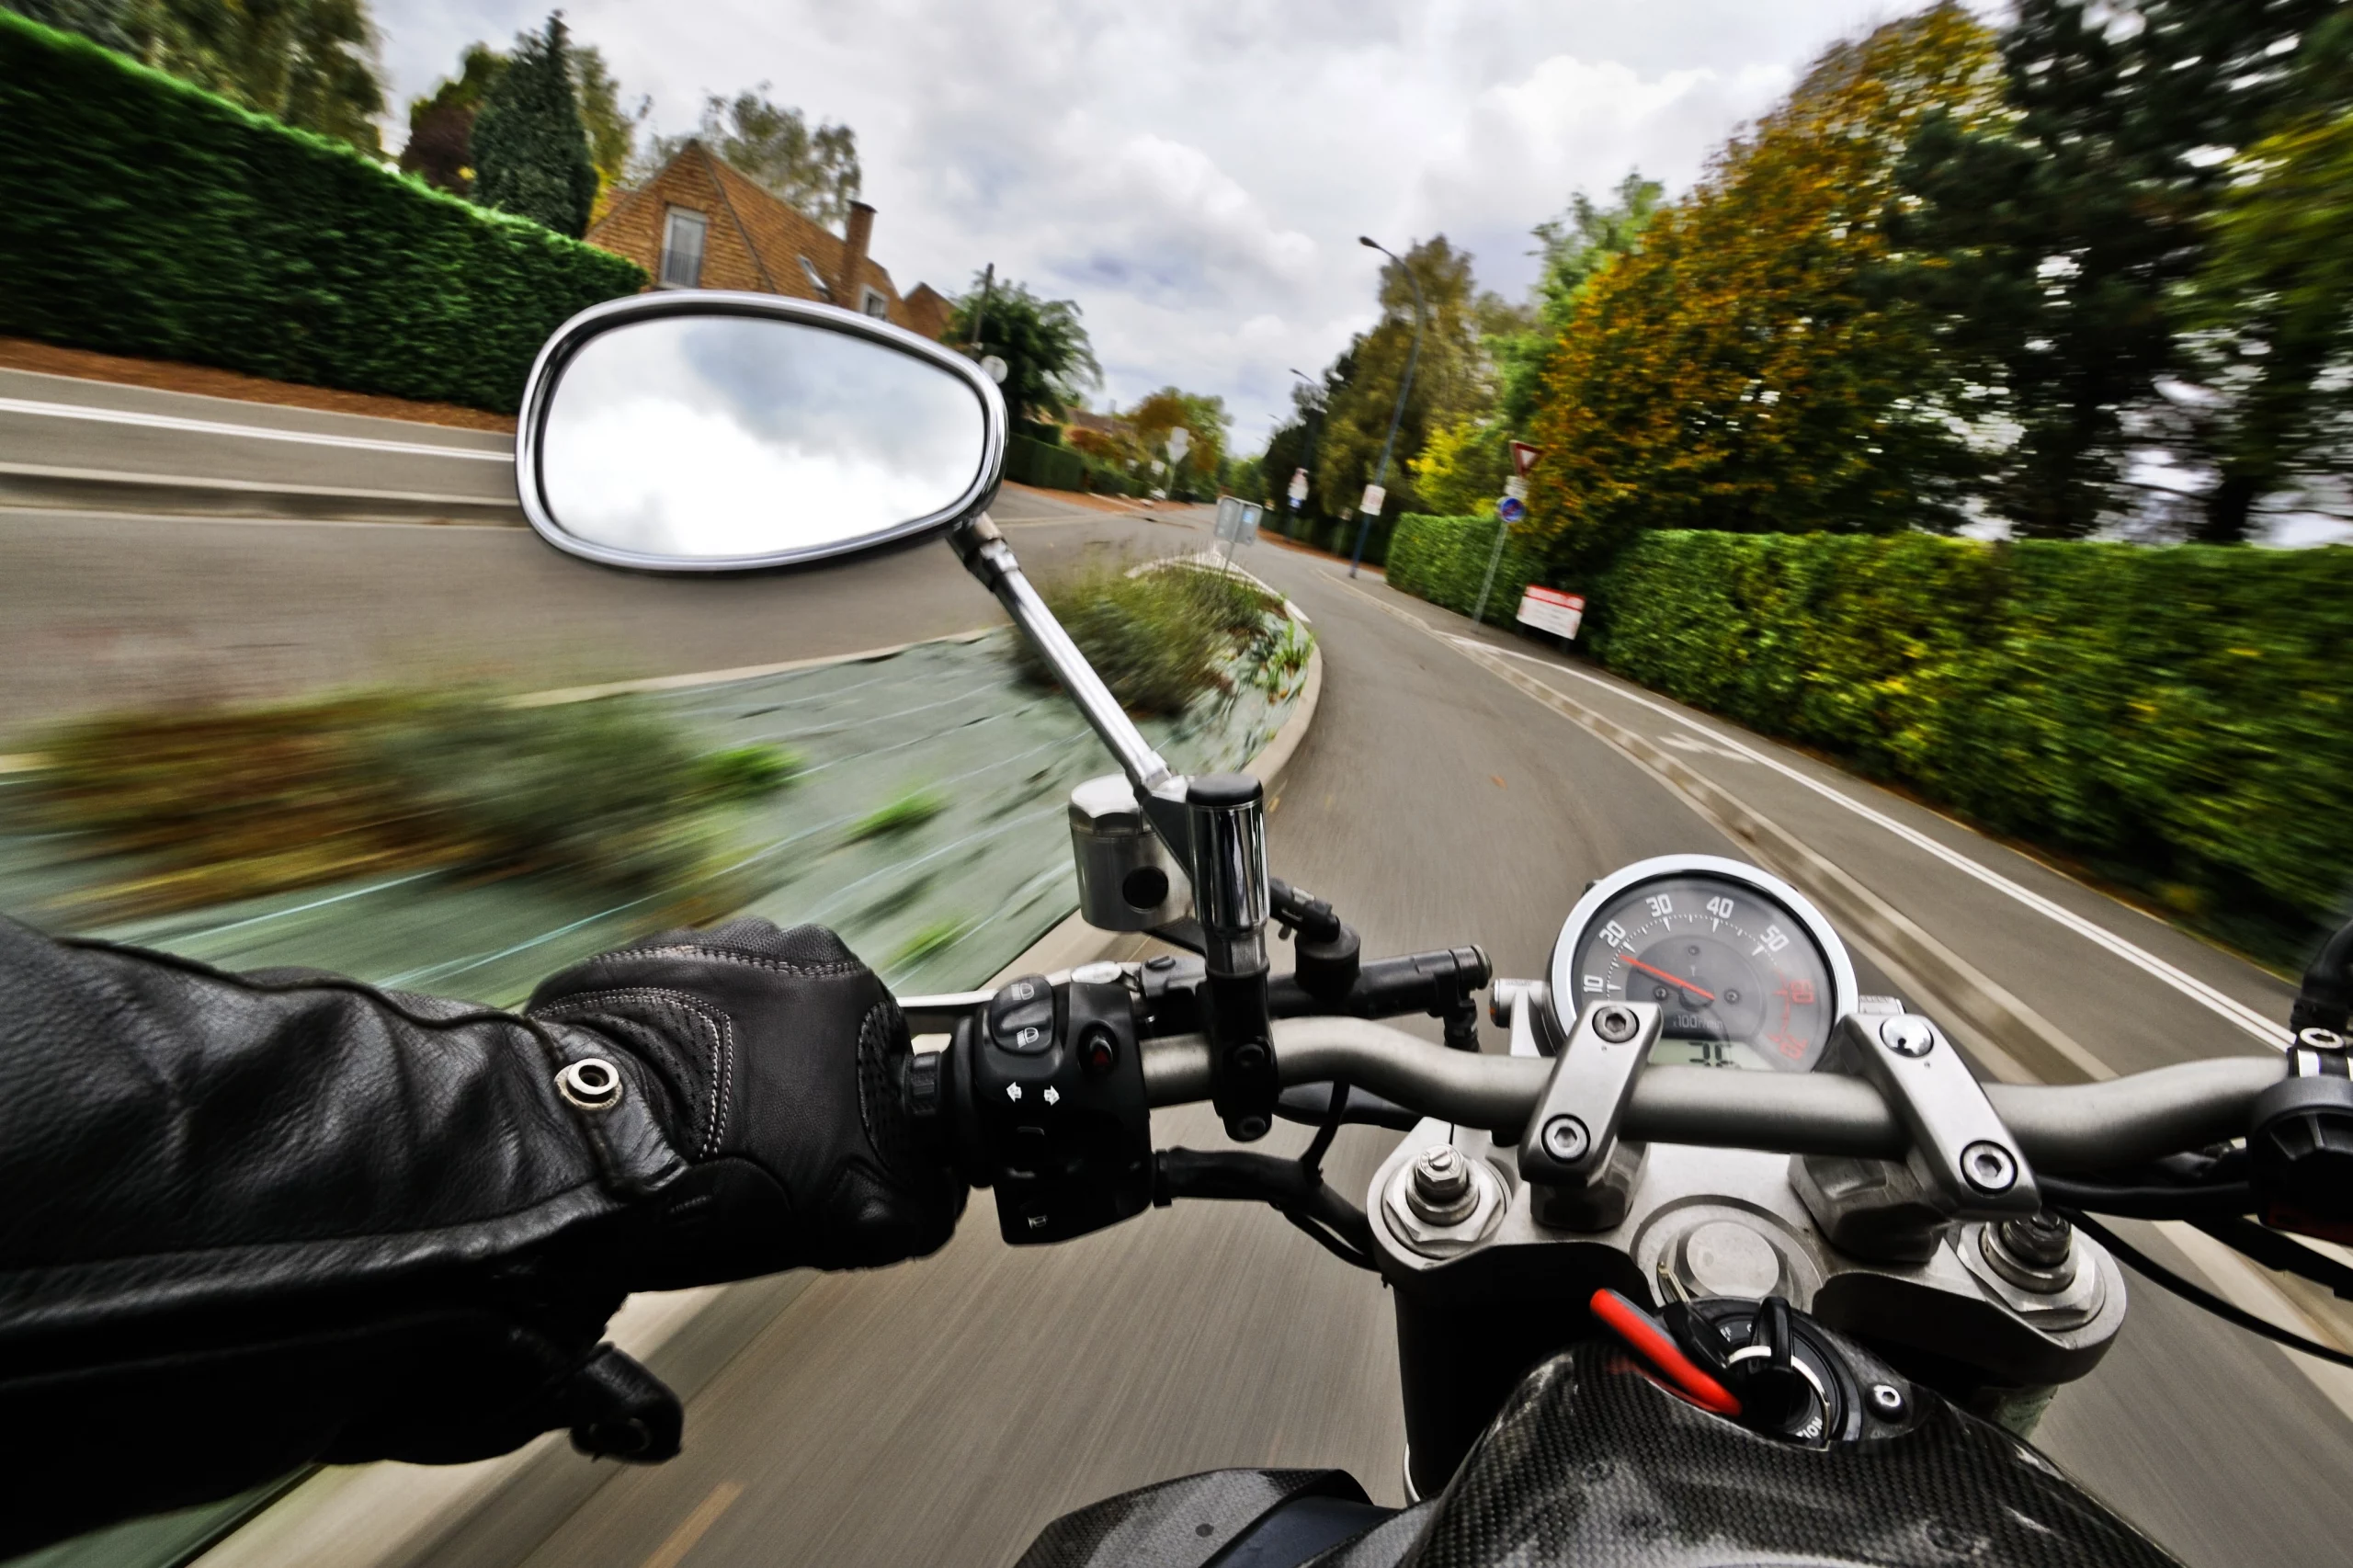 Helmet Improve Your Survival Chances in a Motorcycle Accident